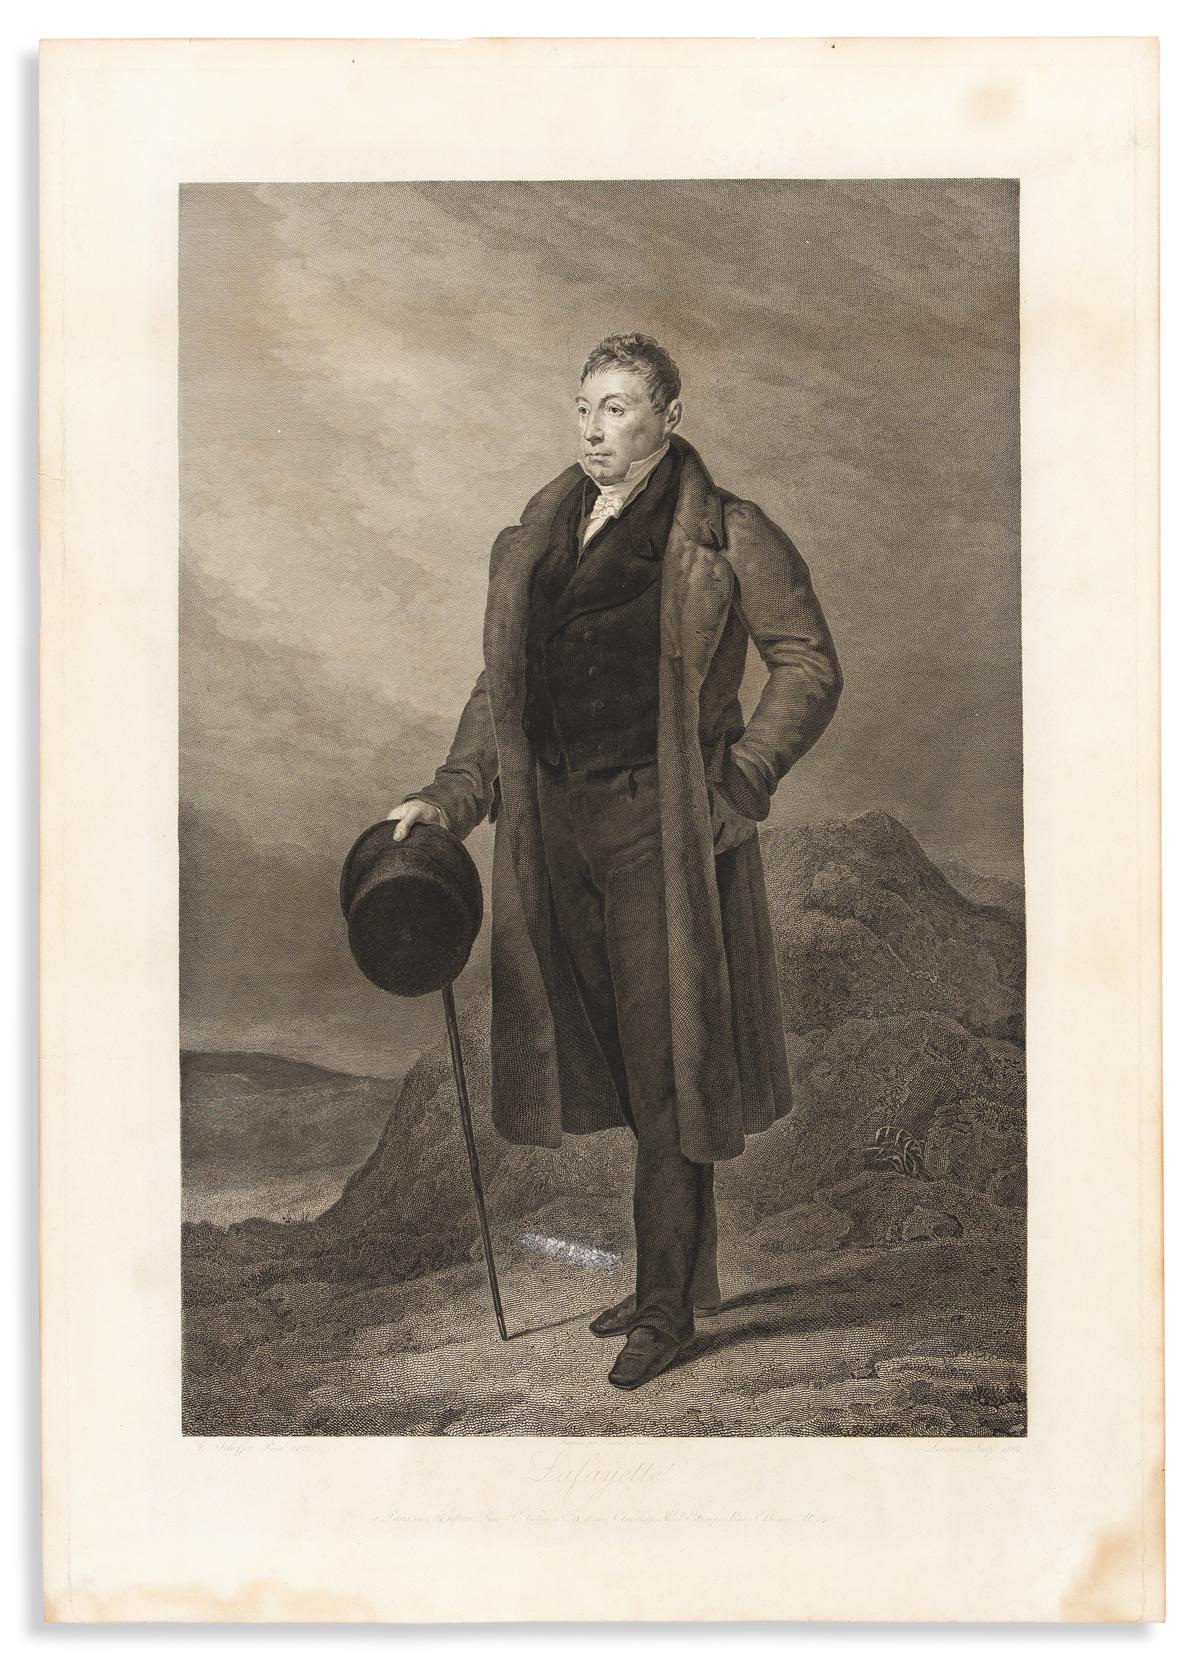 (FOUNDING FATHERS.) J.M. Leroux, engraver; after Scheffer. Full-length portrait of Lafayette, produced as he began his tour of America.